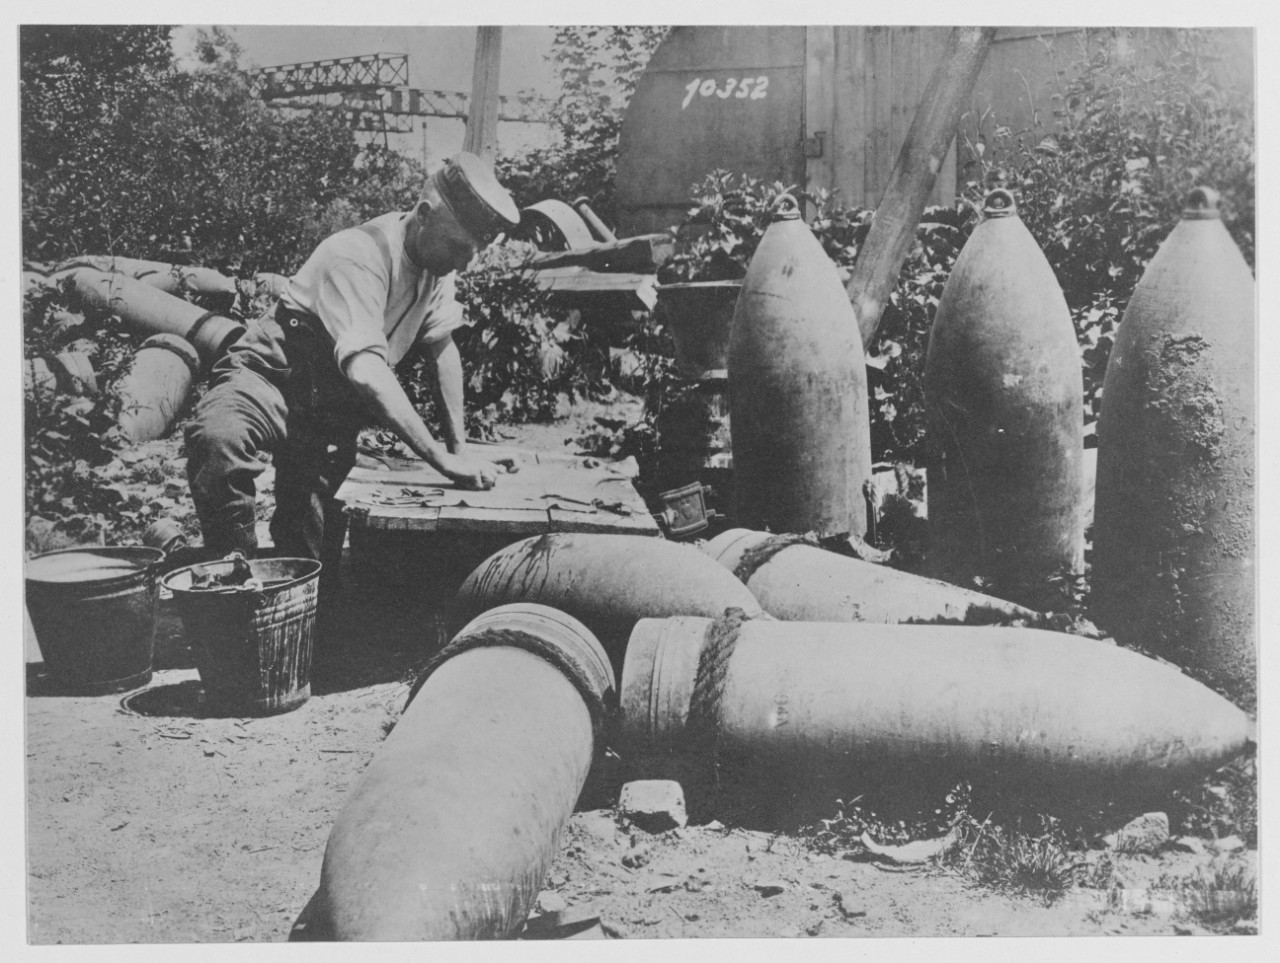 German railroad soldiers washing clothes among 30.5 in shells